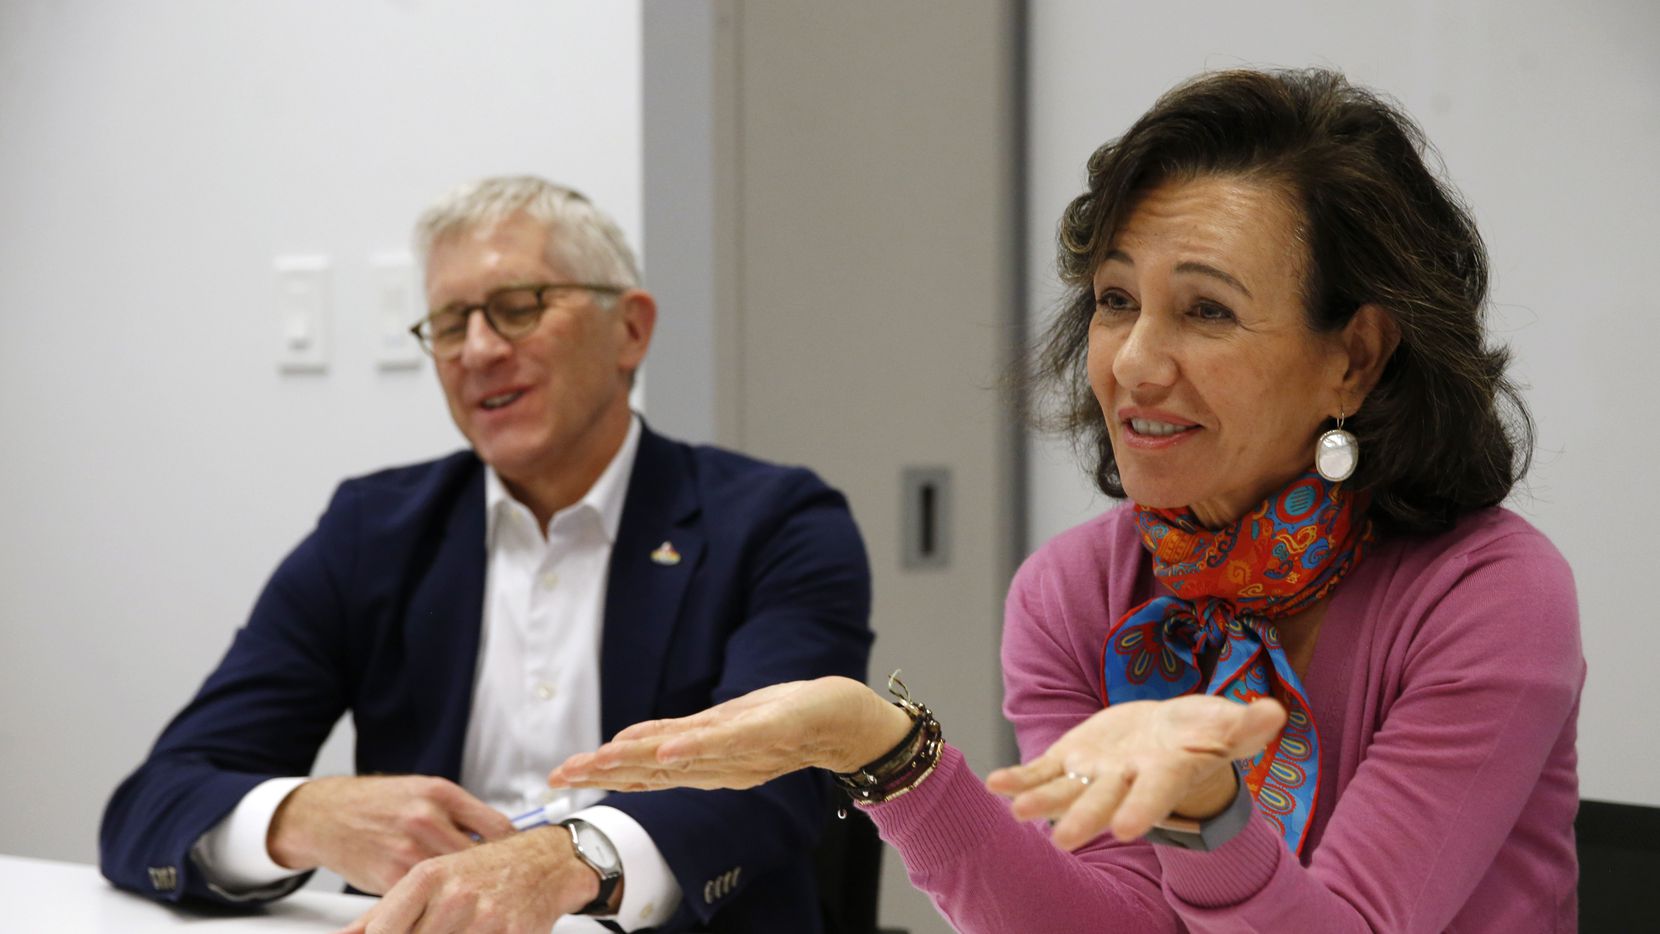 Ana Botin (right), executive chairman of Banco Santander, and Scott Powell, CEO of Santander Consumer USA, said they've improved the financial controls and standards at the subprime lender. Despite a high share of troubled loans, they're not worried about a downturn.